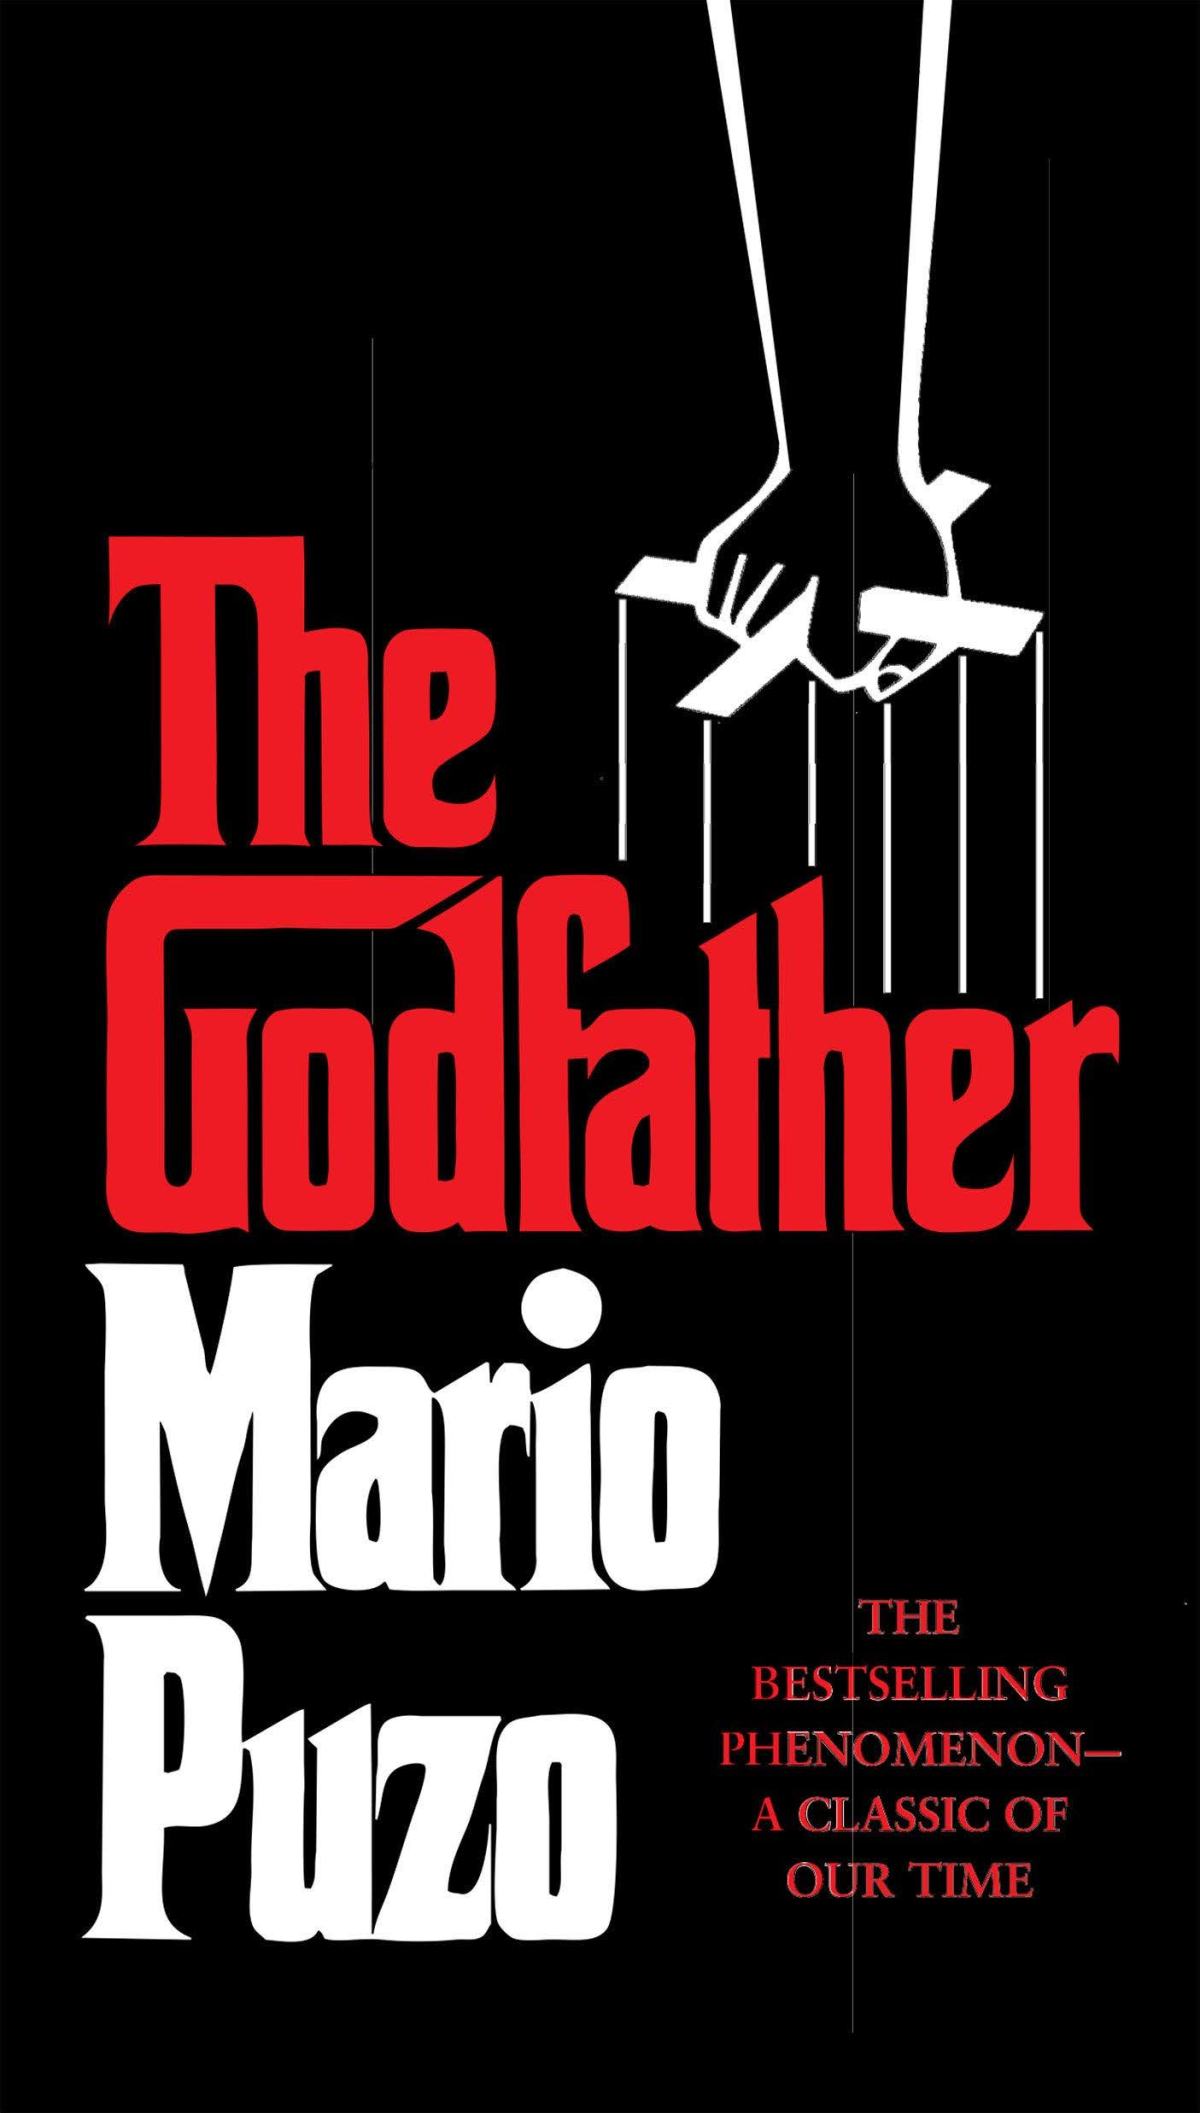 America And The Godfather